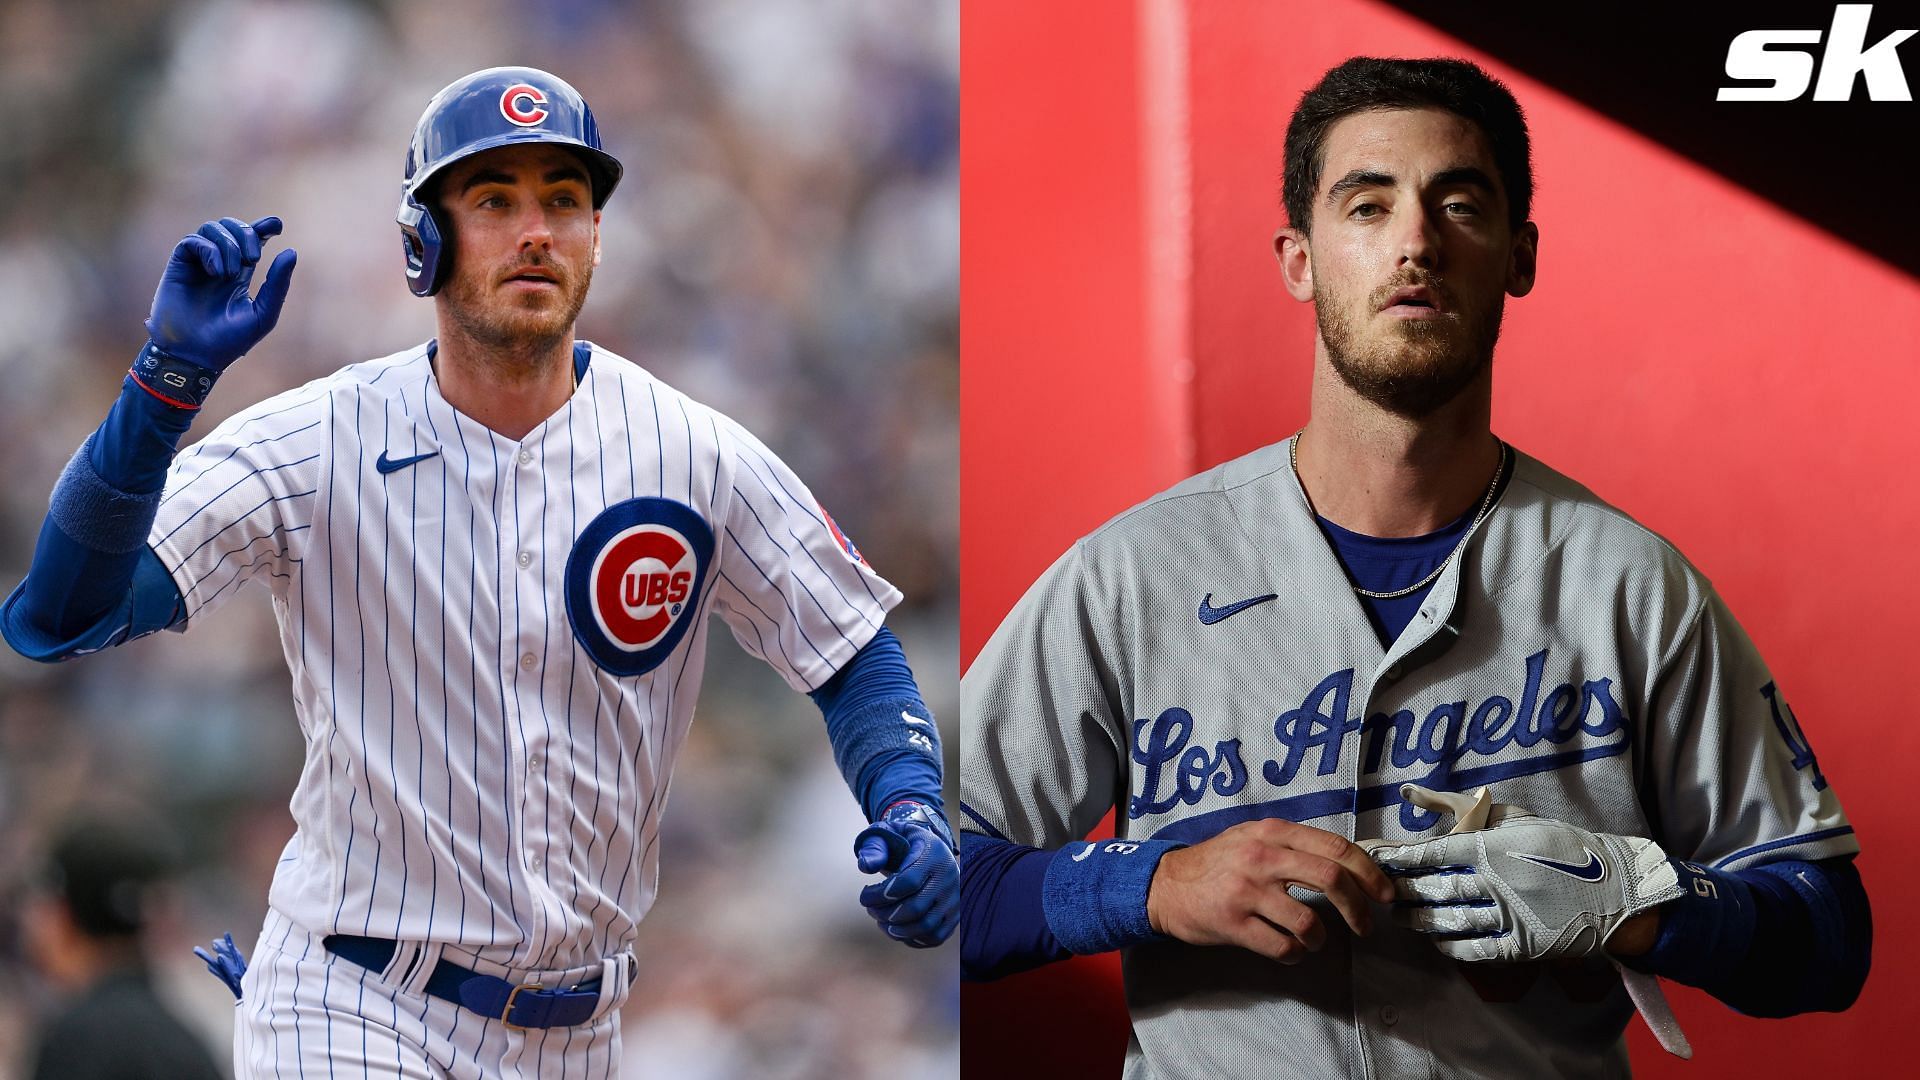 MLB analyst discusses likely destinations for star free agent Cody Bellinger this offseason